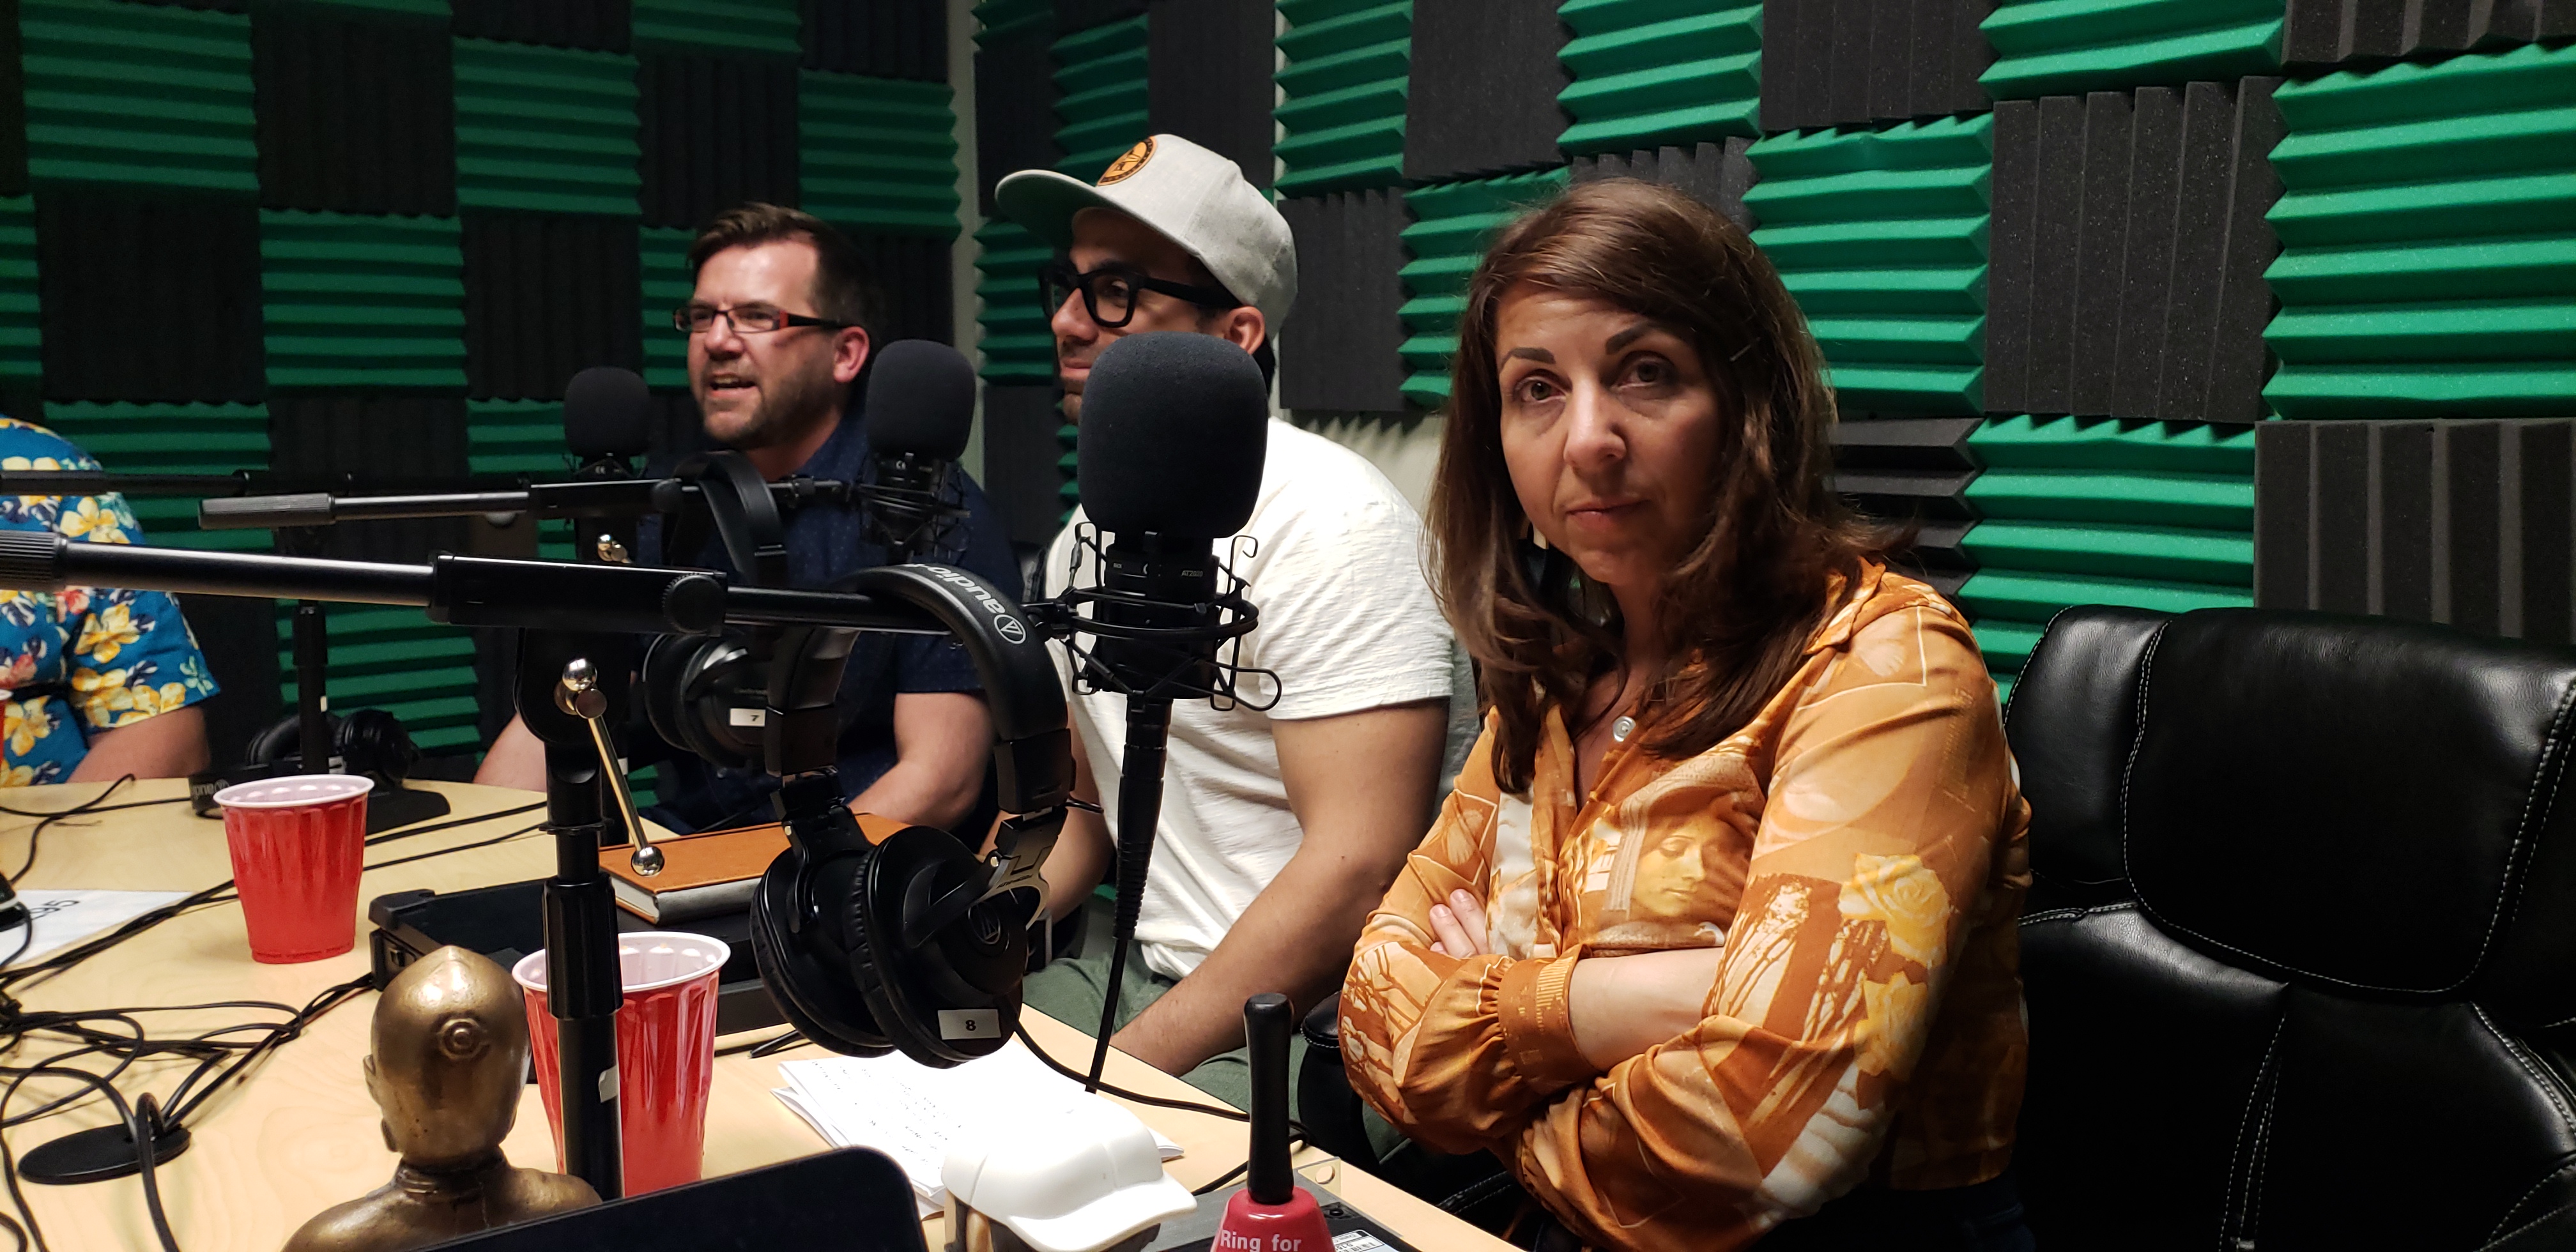 IT in the D, Episode 252 – Kelly IT, Fifth Wall Escape Room